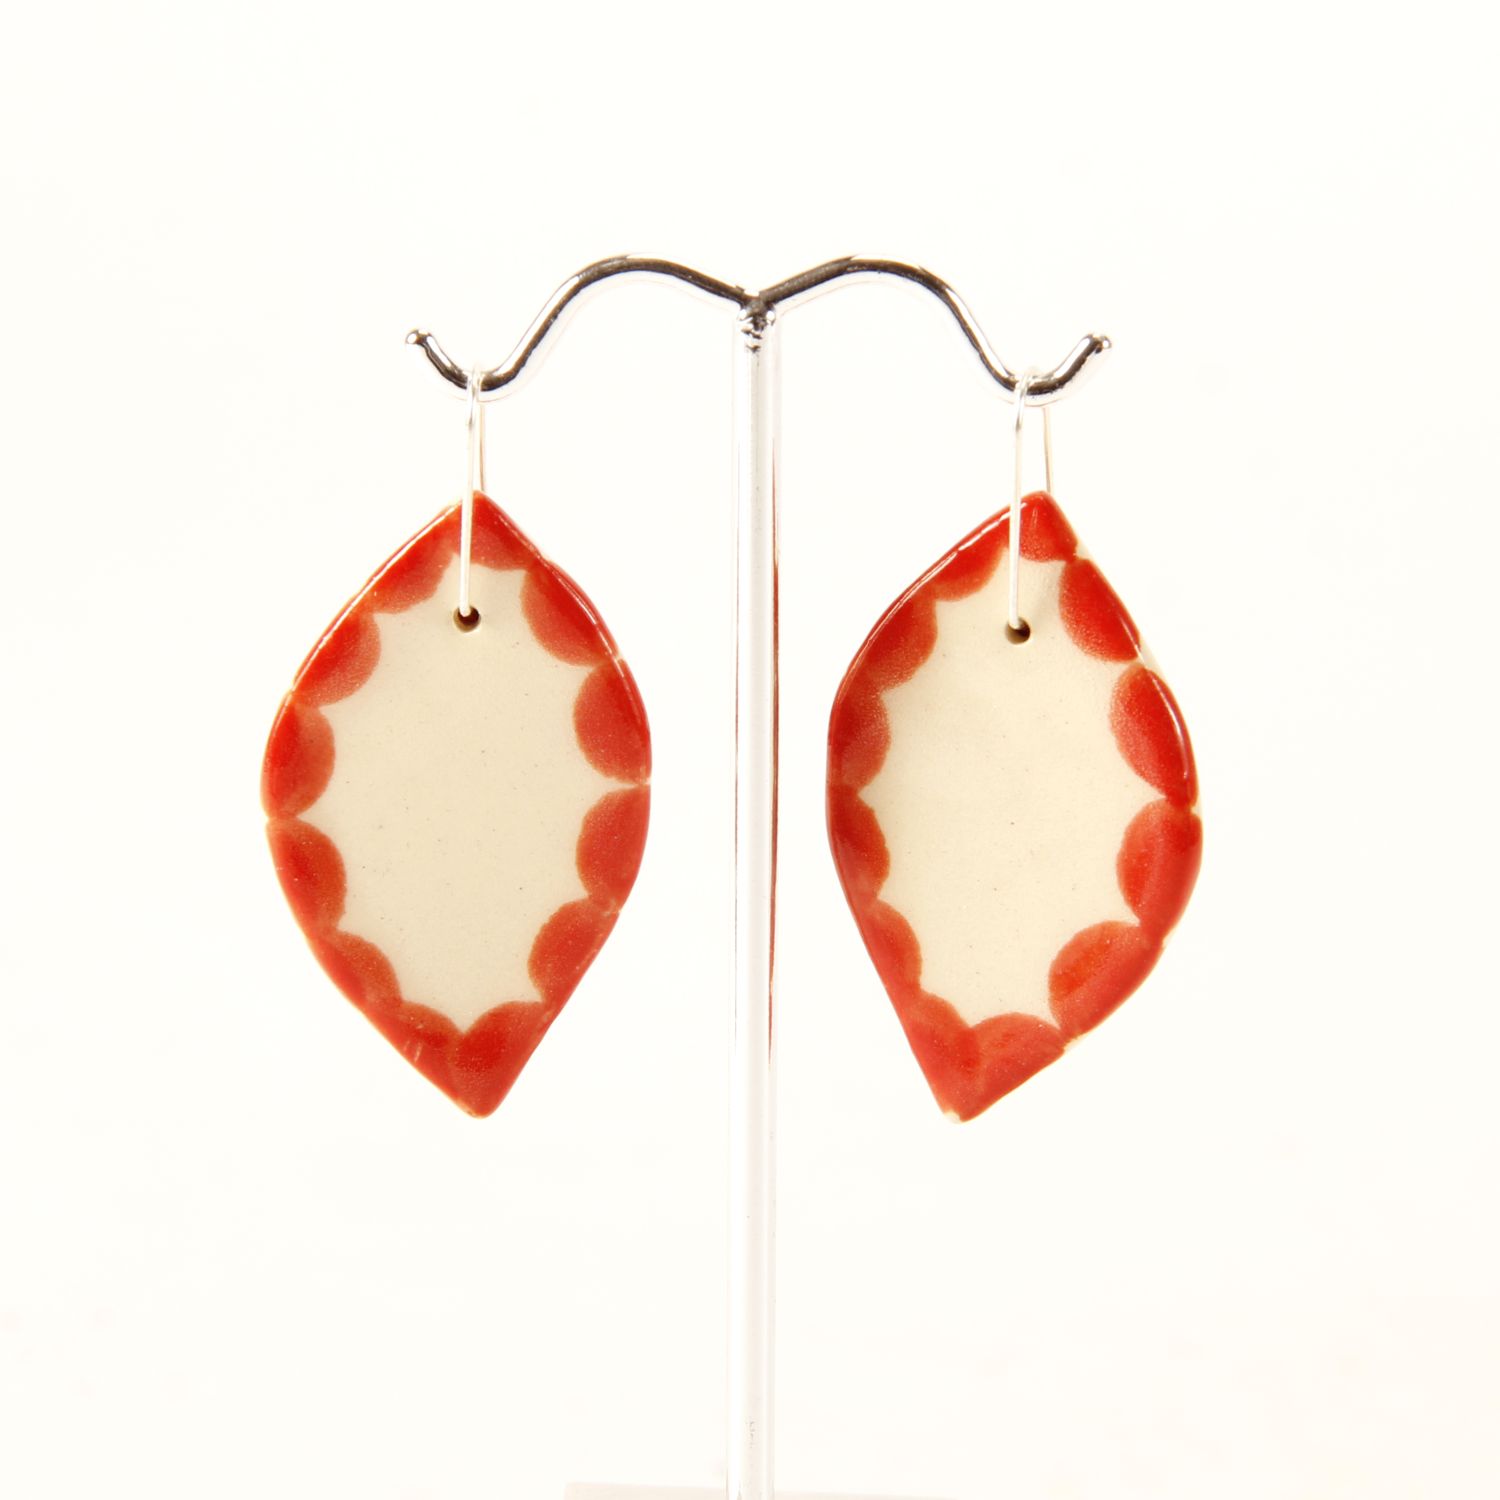 Here and Here: Almond Shaped Earrings with Dots Product Image 1 of 2